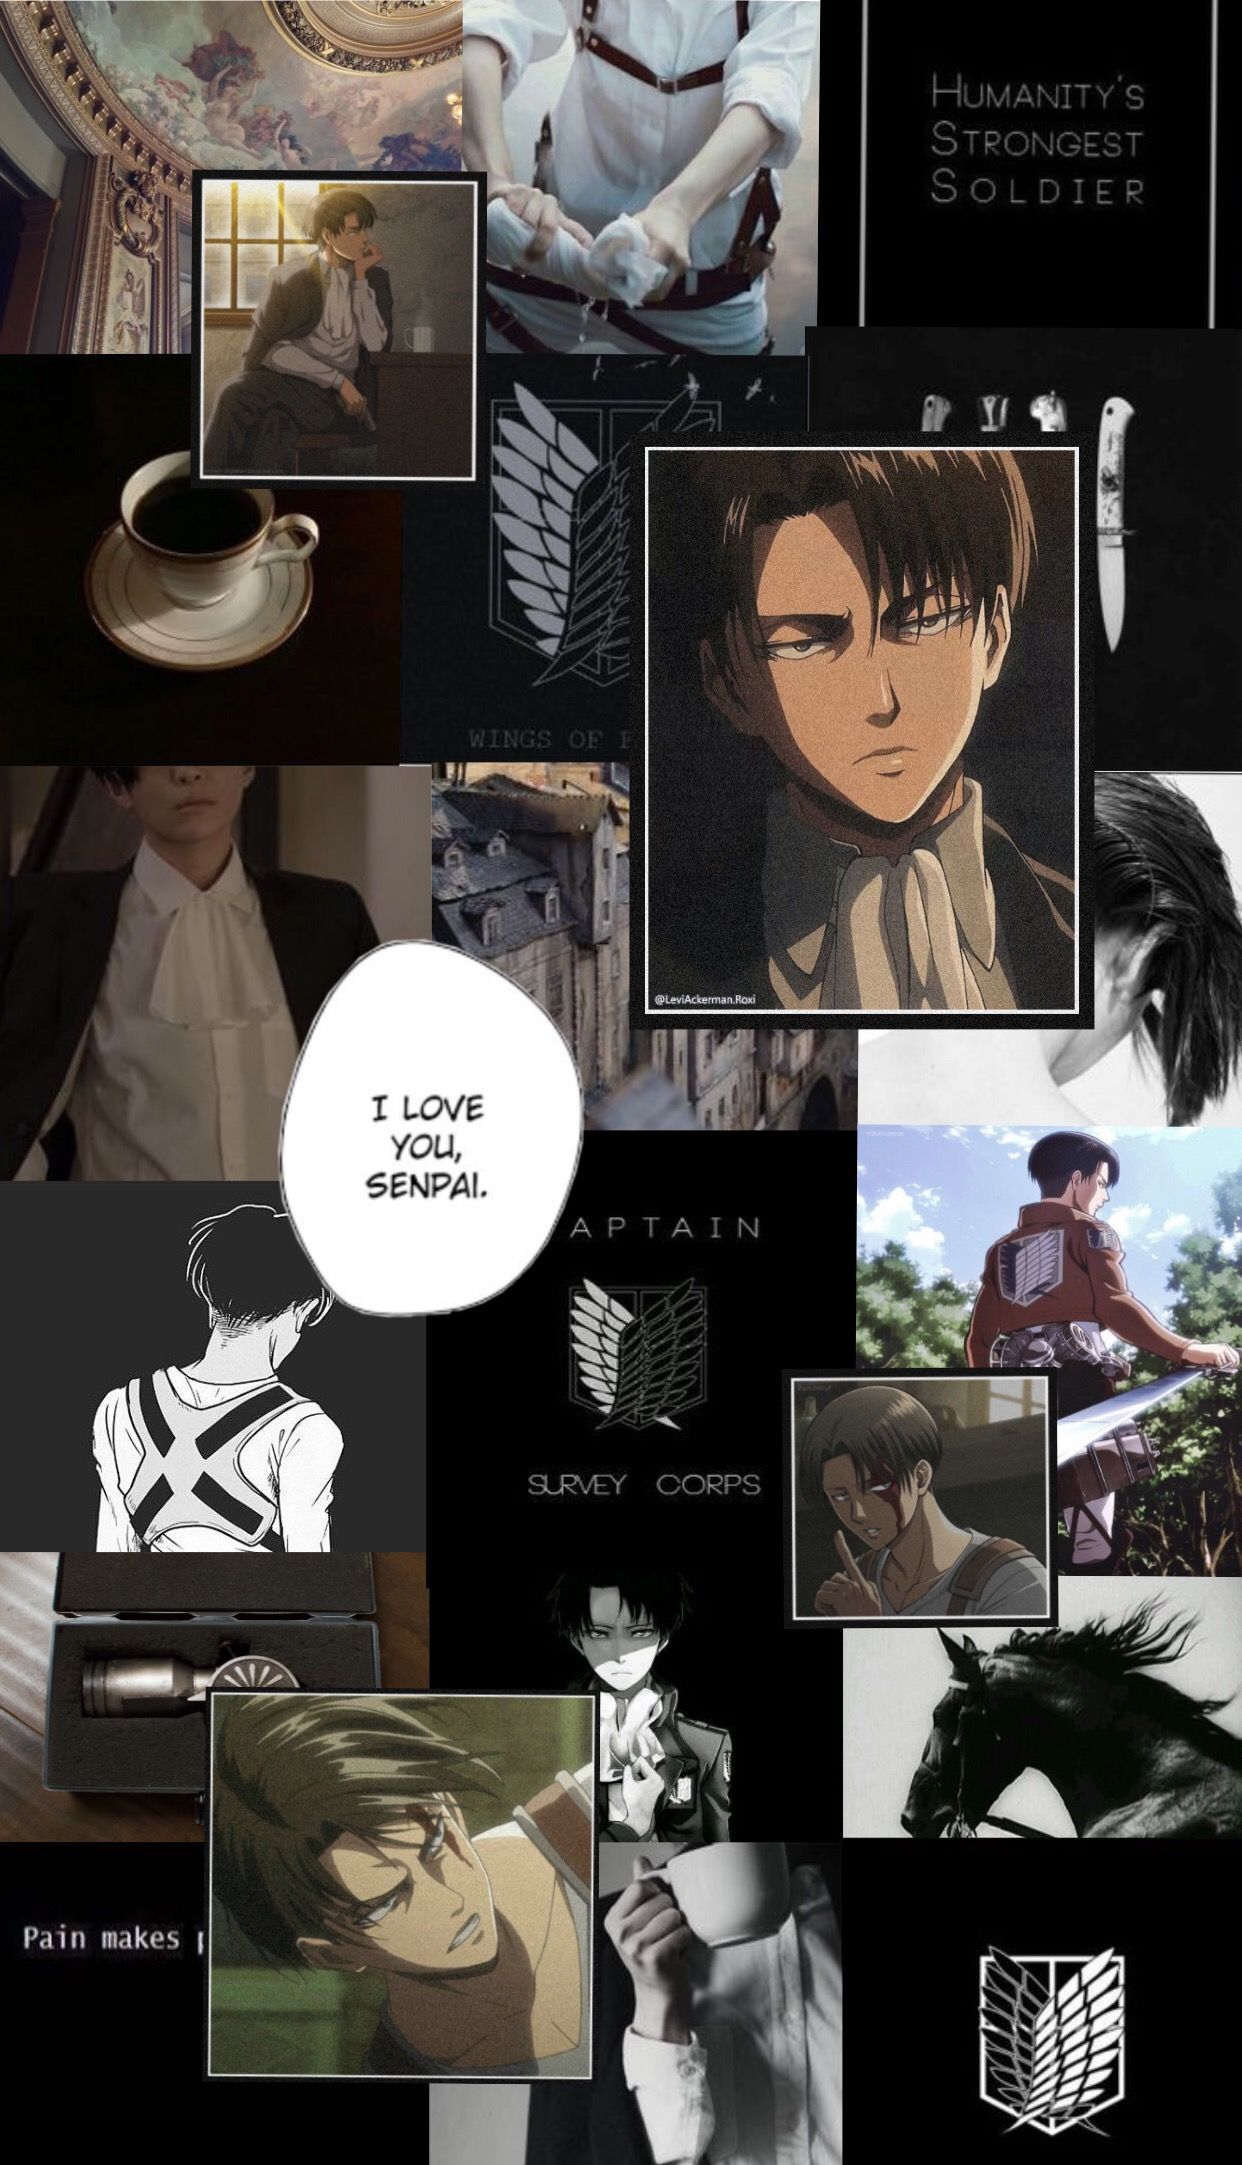 Aesthetic Levi Wallpapers Wallpaper Cave